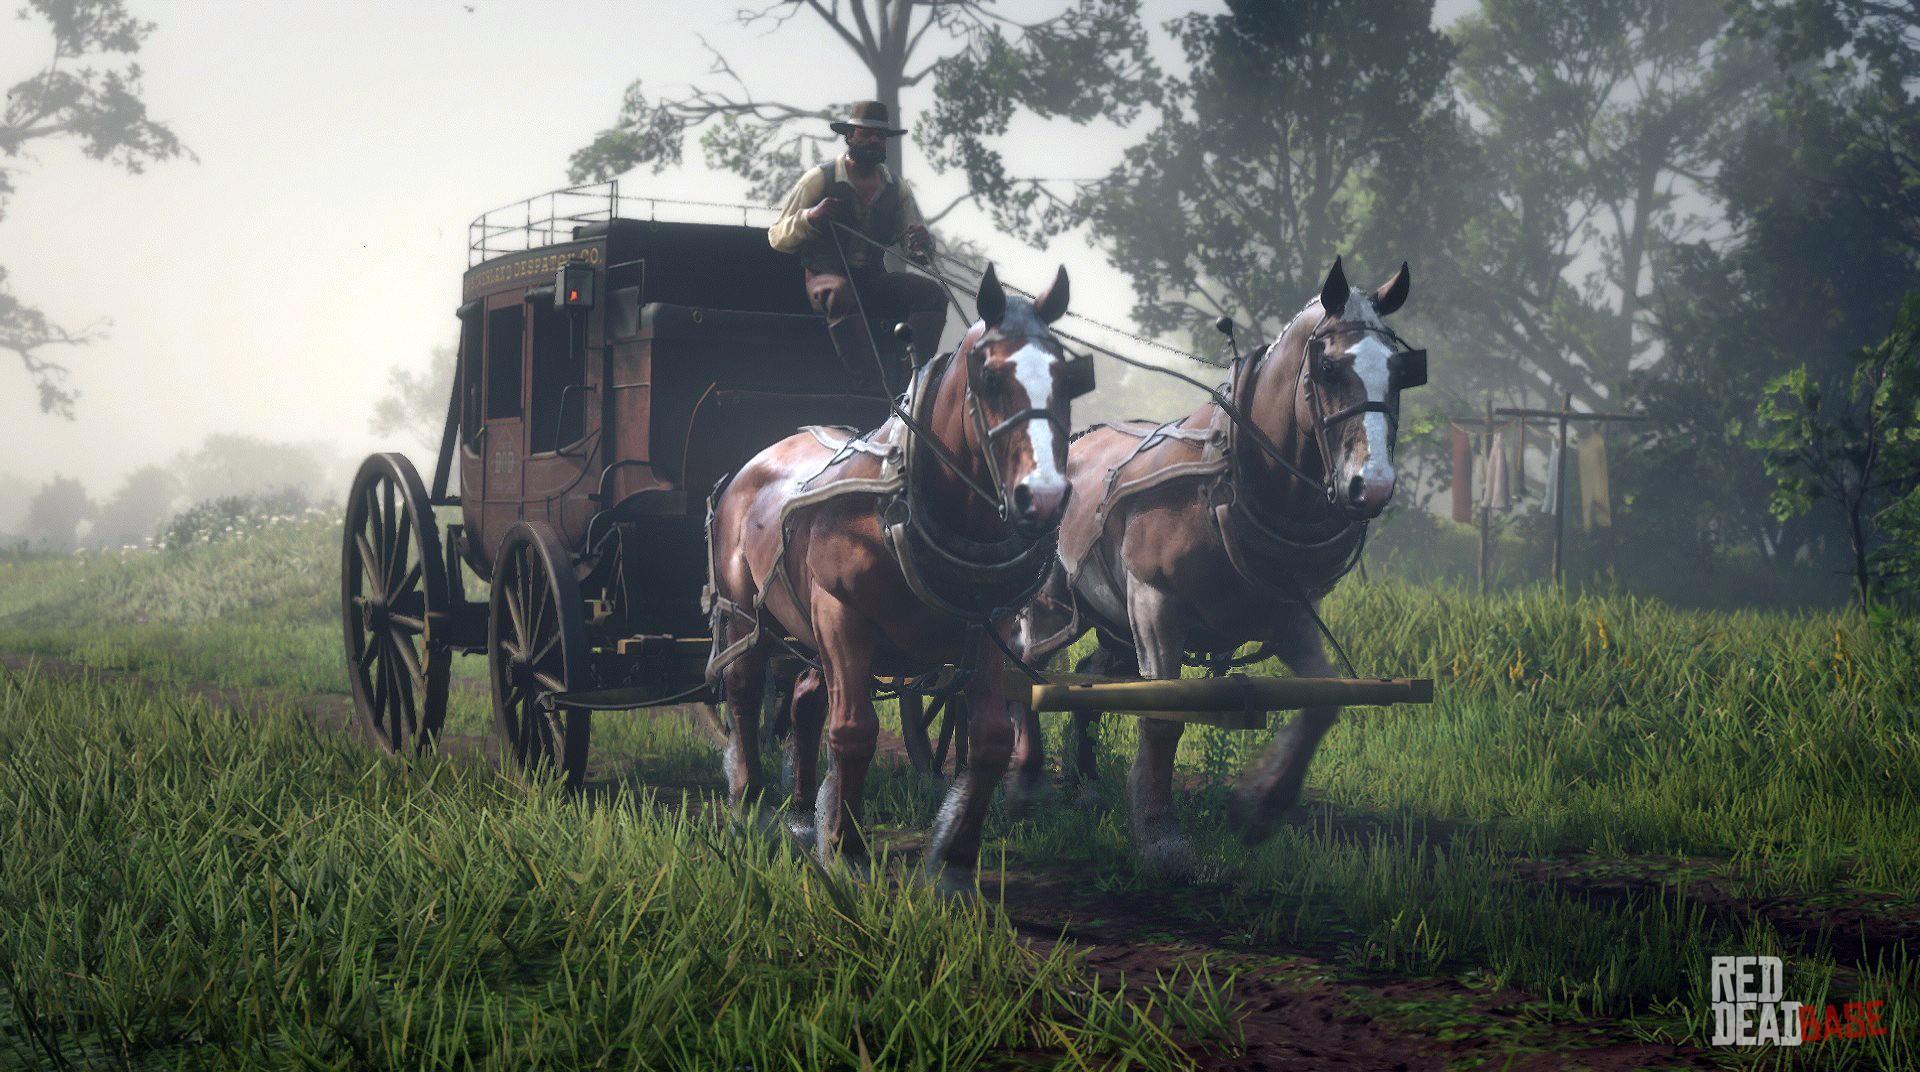 Stagecoach (Taxi) | Red Dead Redemption 2 Vehicles & Transport | Red